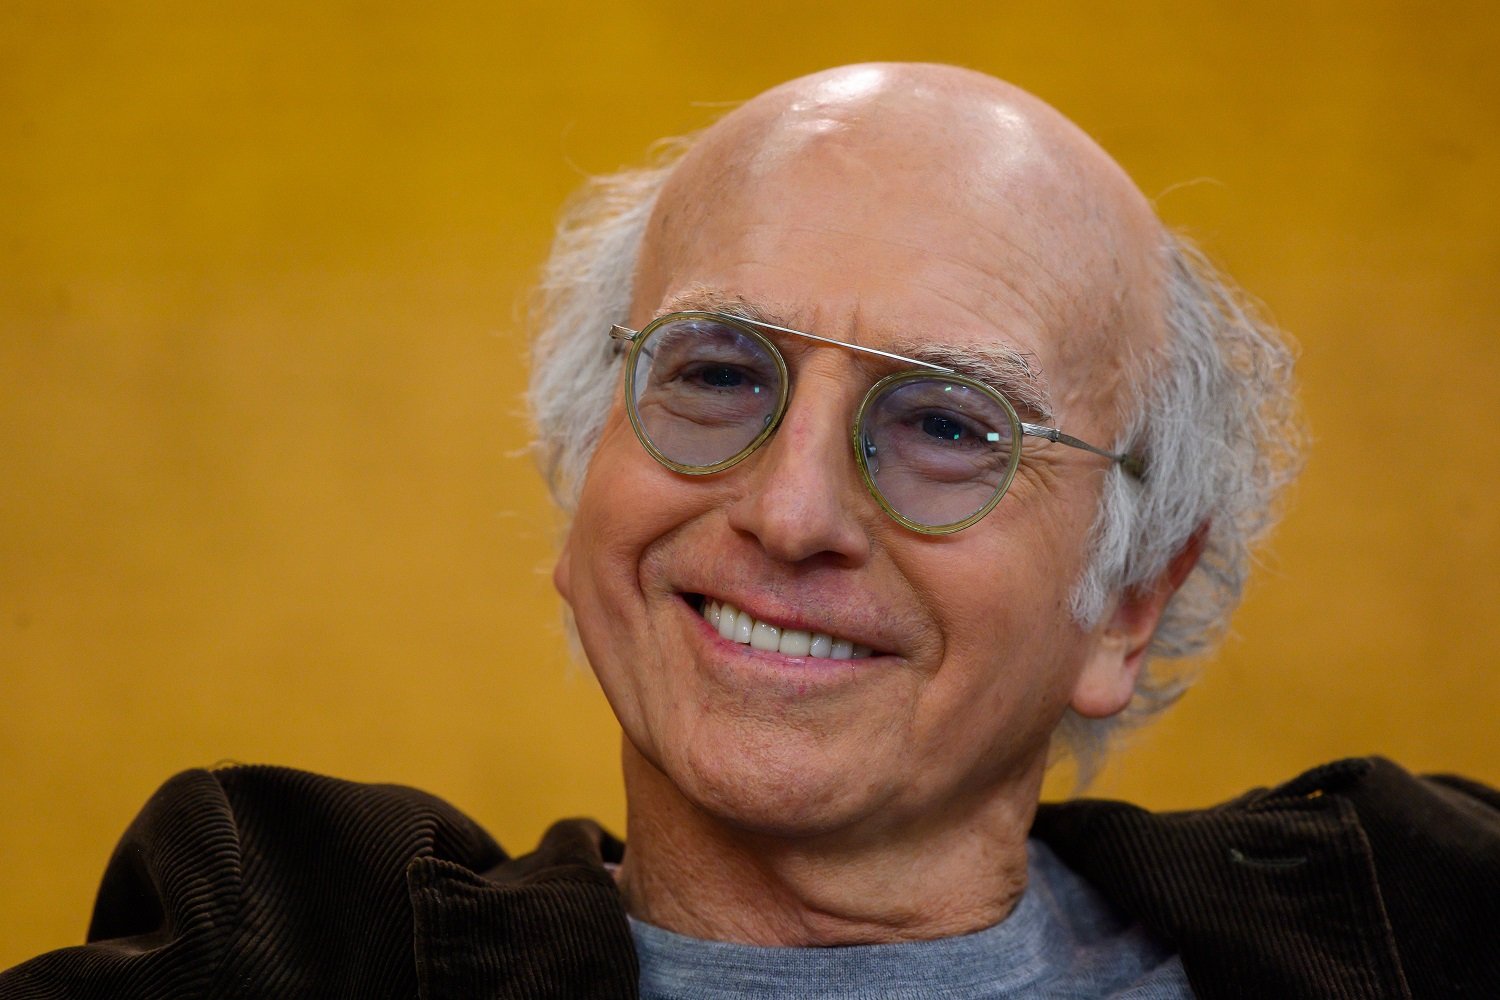 Curb Your Enthusiasm star and creator Larry David